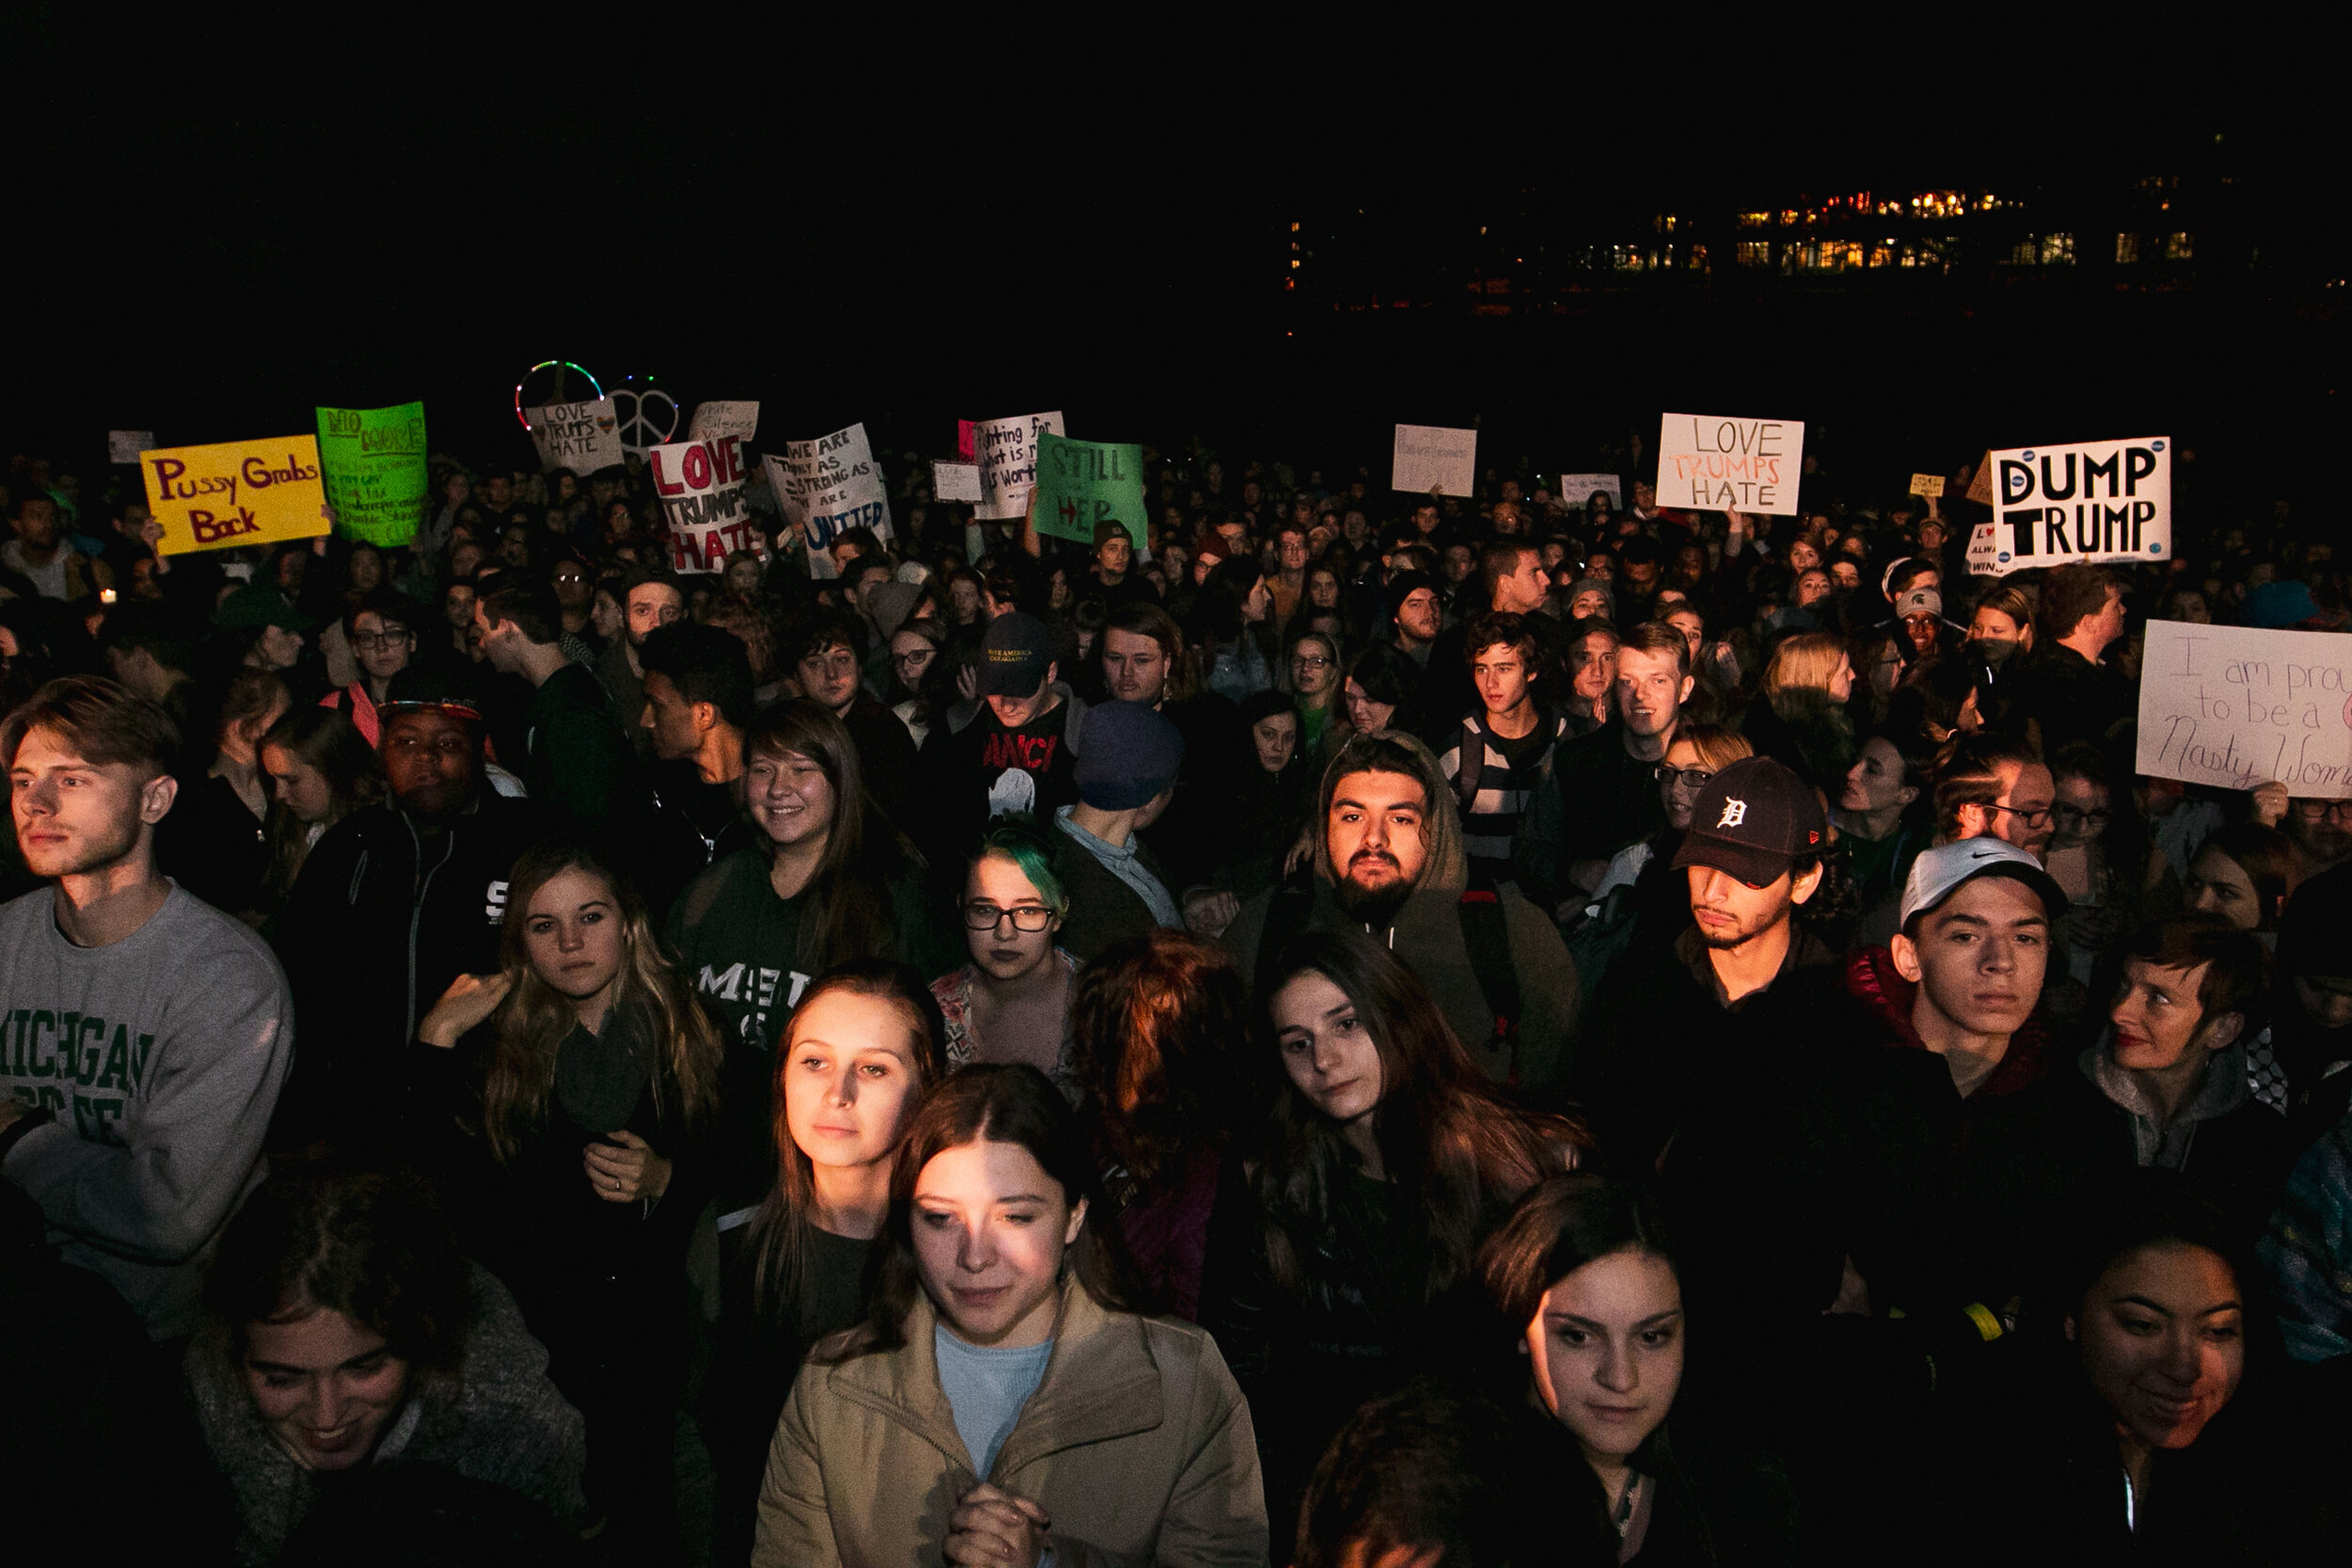  Students, faculty, and local community members gather to protest the results of the 2016 presidential election at Michigan State University on Nov. 10, 2016 in East Lansing, Michigan.&nbsp; 